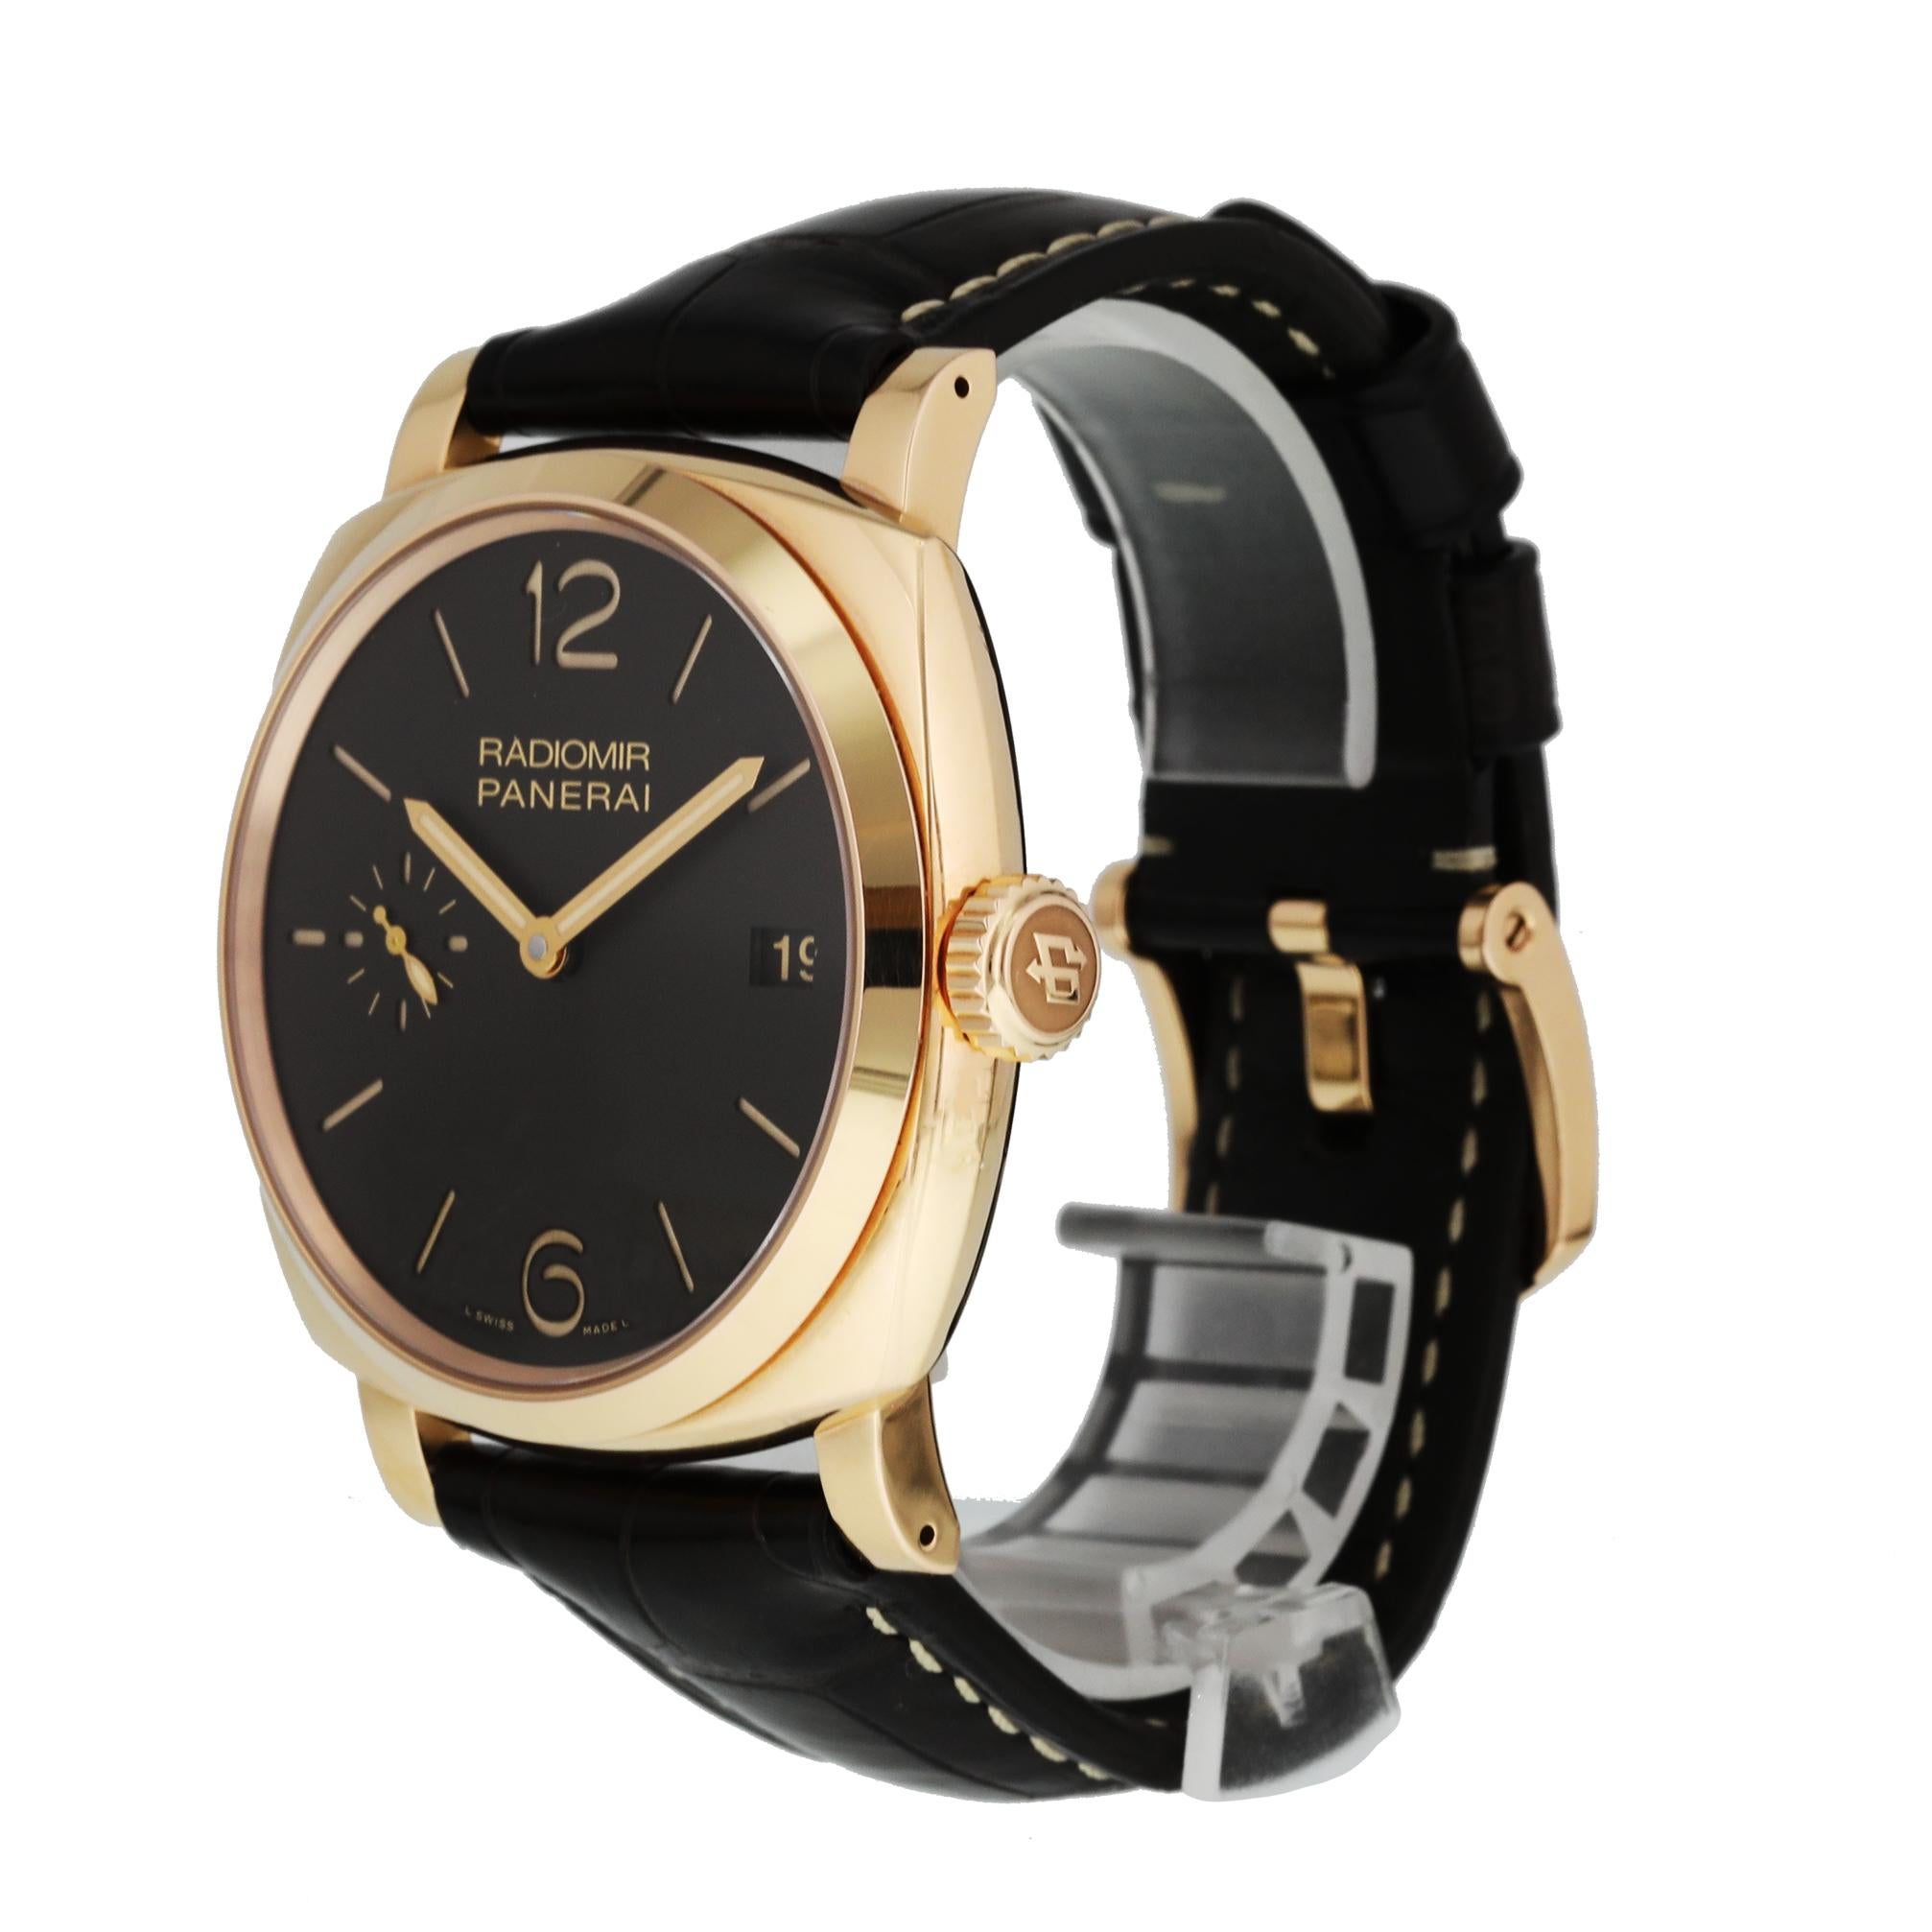 Panerai Radiomir 1940 PAM515 3 Days Oro Rosso Mens Watch.
47mm 18k Rose Gold case. 
Rose Gold Stationary bezel. 
Brown dial with Luminous gold hands and Arabic numeral hour markers. 
Date display at the 3 o'clock position. 
Brown alligator leather